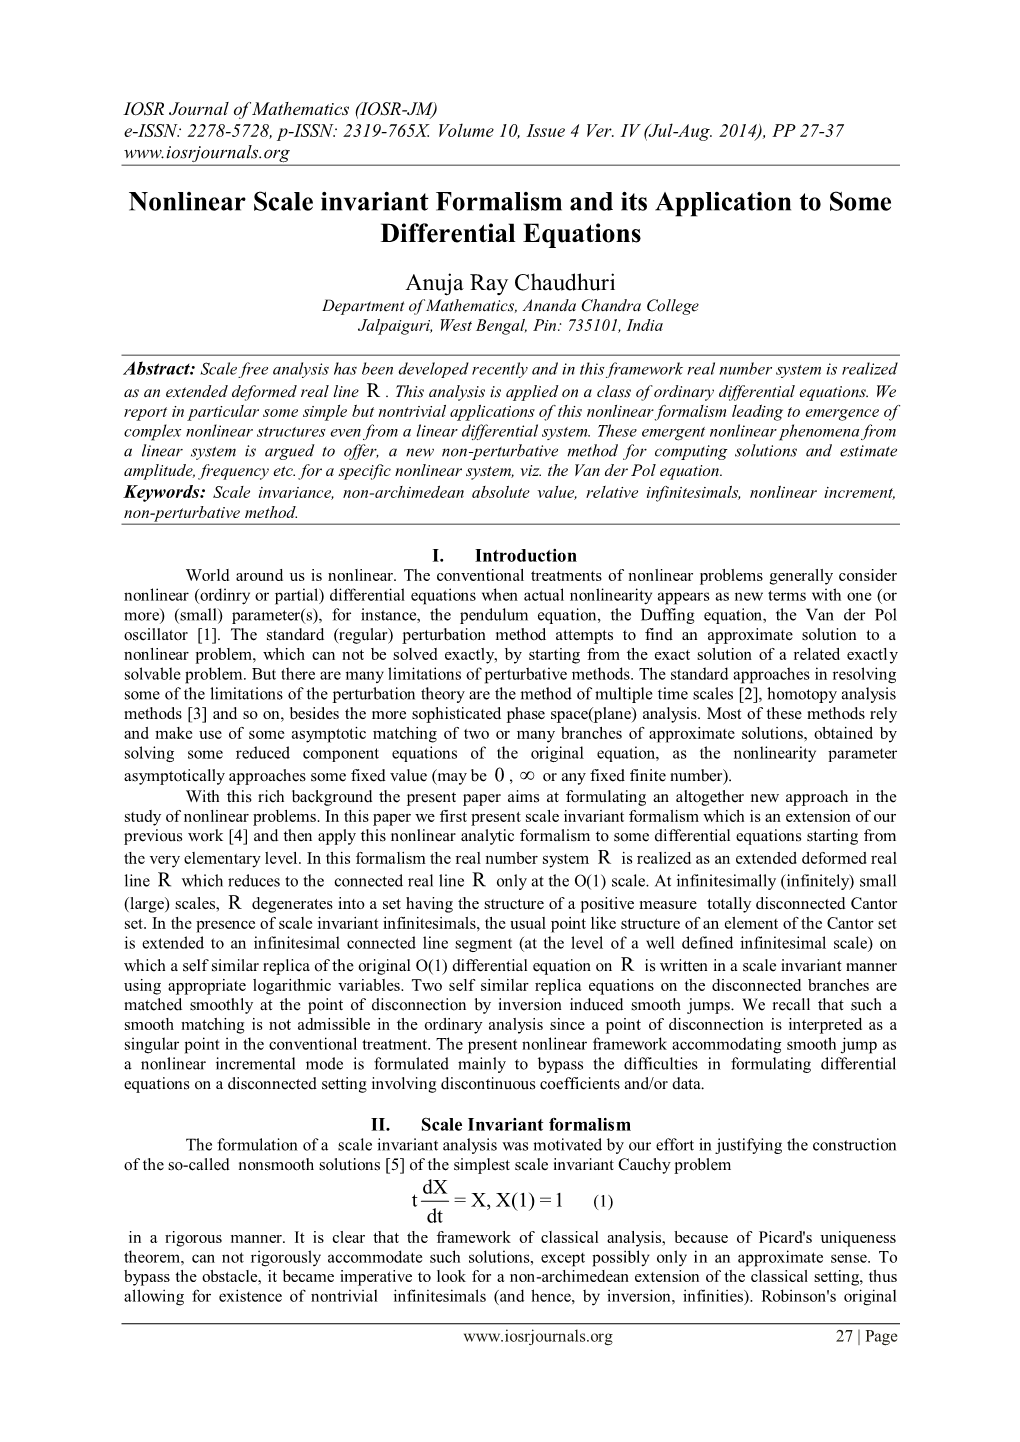 Nonlinear Scale Invariant Formalism and Its Application to Some Differential Equations